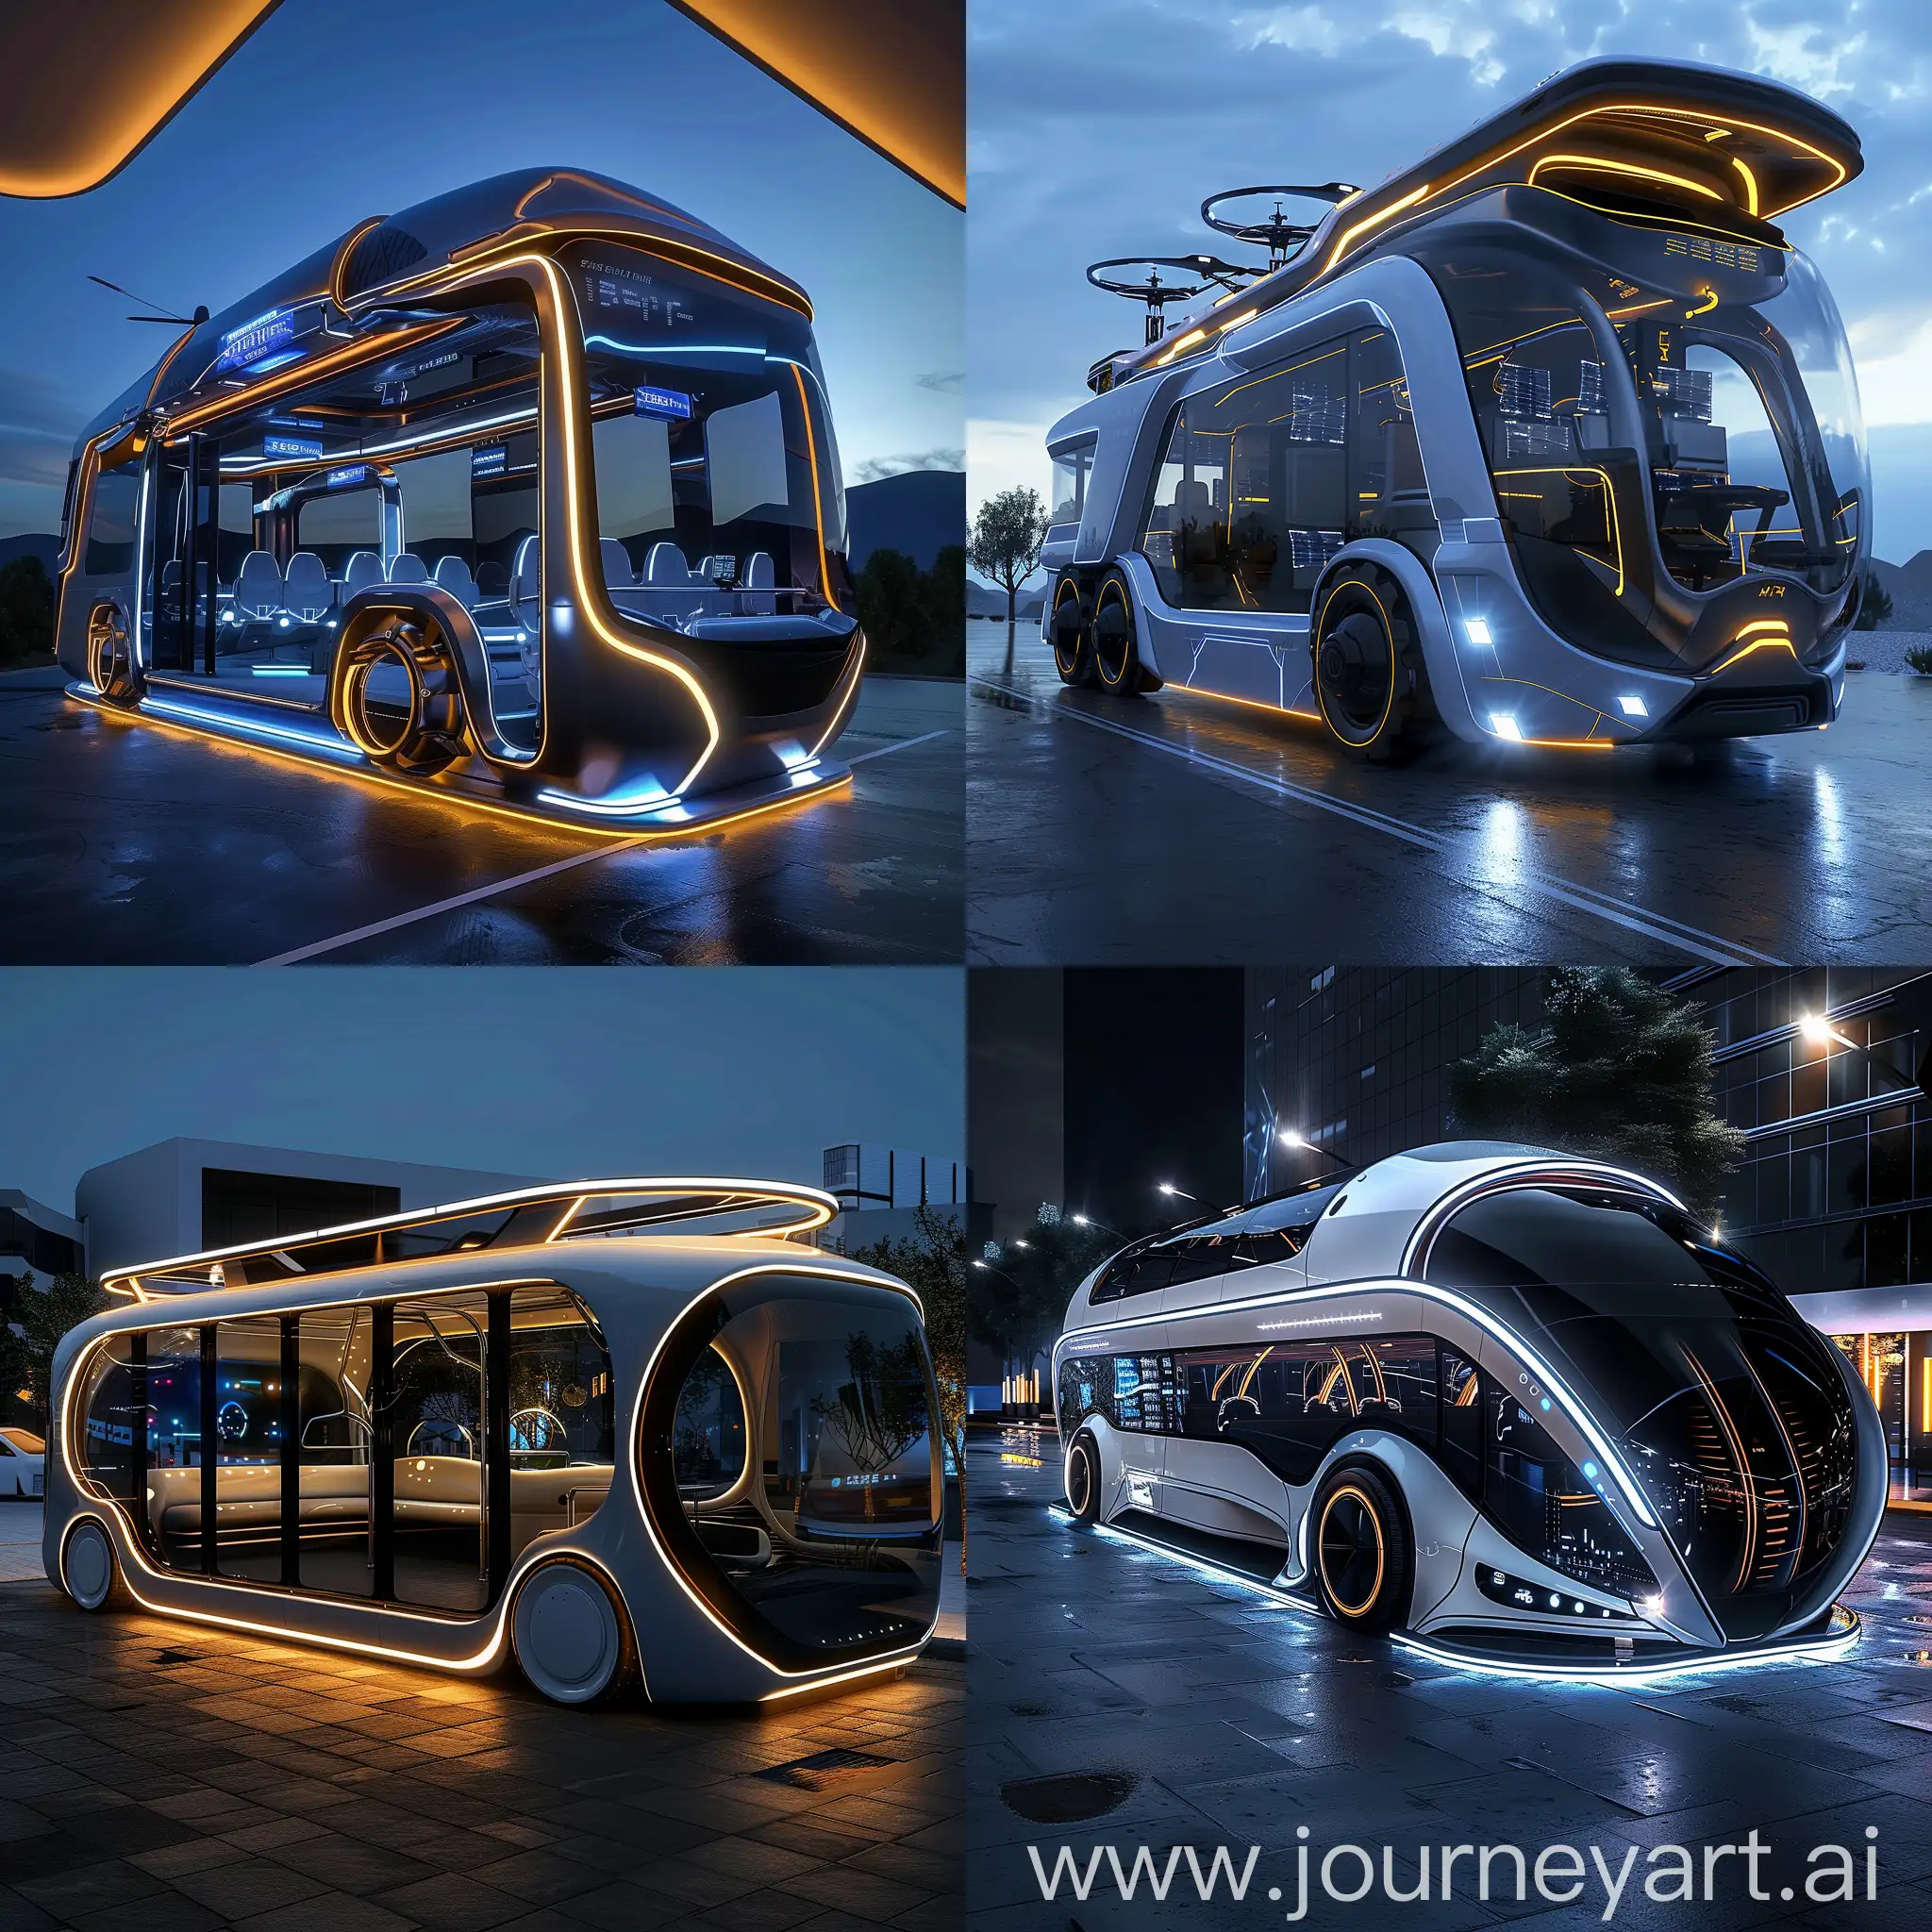 Sci-Fi bus, Advanced Science and Technology, Advanced, Autonomous Driving Systems, Electric Powertrains, Regenerative Braking, Smart Suspension Systems, Energy-Efficient HVAC, AI-Powered Maintenance, Modular Interior Design, Advanced Navigation Systems, Wireless Charging, Augmented Reality Windows, Aerodynamic Design, Solar Panel Integration, E-ink Display Surfaces, Smart Glass, LED Lighting, Robotic Wheel Units, Drone Deployment Ports, Retractable Connectors, Interactive Exterior Panels, Advanced Material Usage, In Unreal Engine 5 Style --stylize 1000